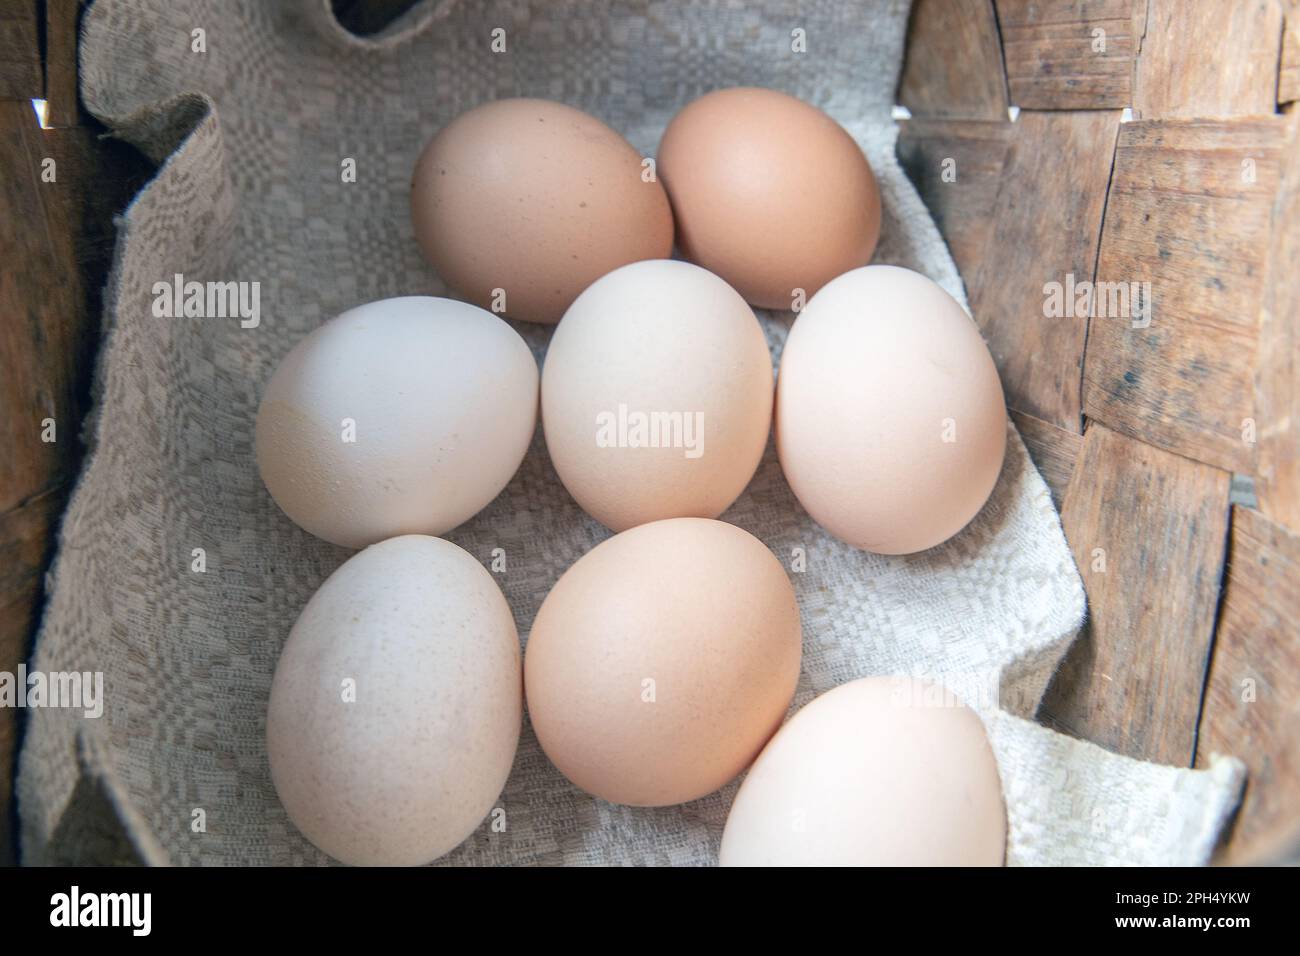 don’t put all your eggs in one basket. popular proverbs and sayings Stock Photo